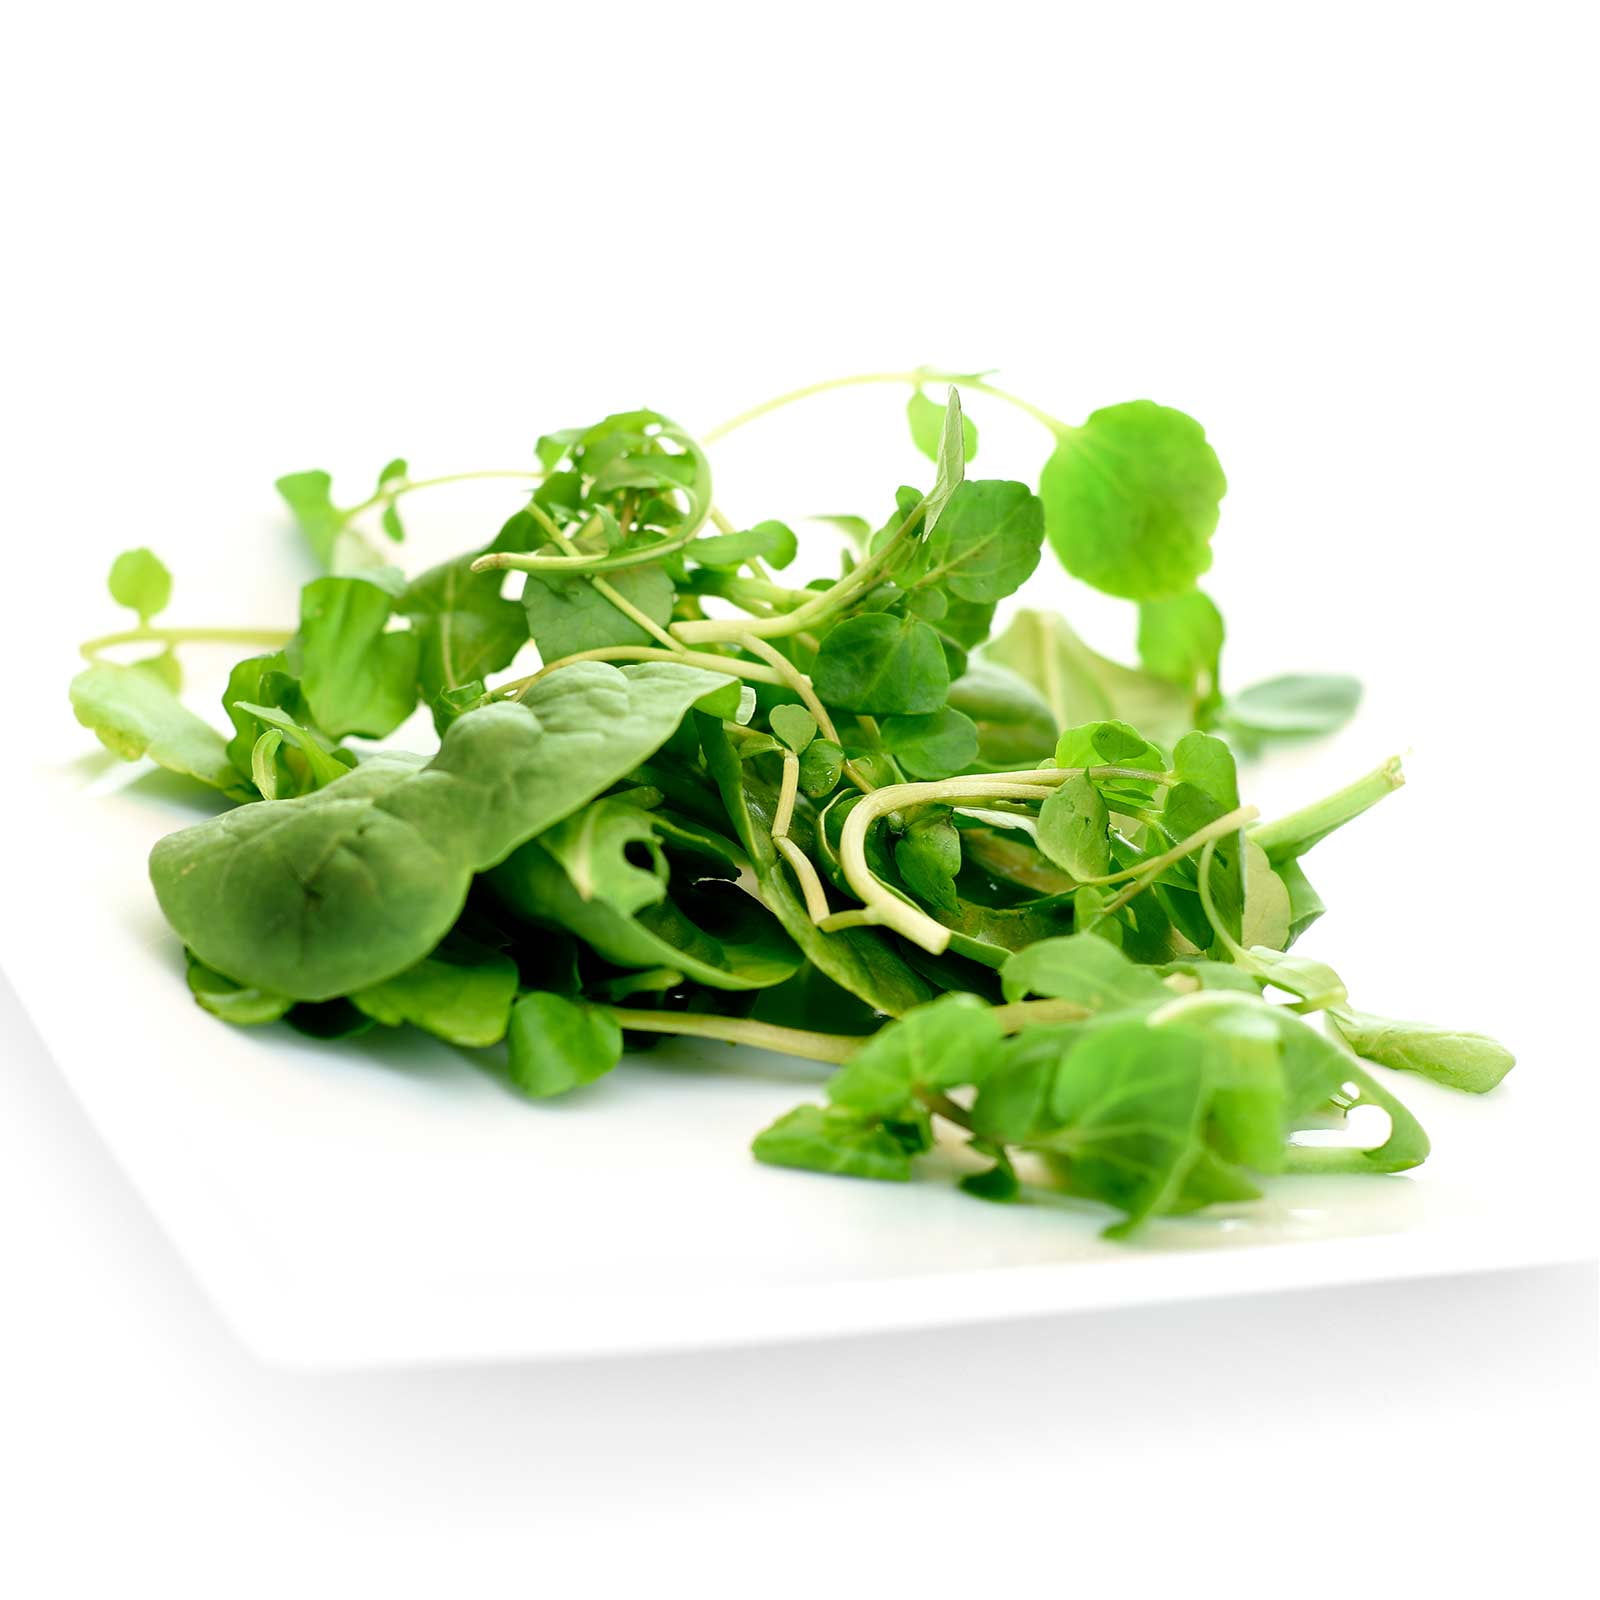 Edible & Fun like Watercress Heirloom UPLAND CRESS Live Plant Shipped In 4” Pot 